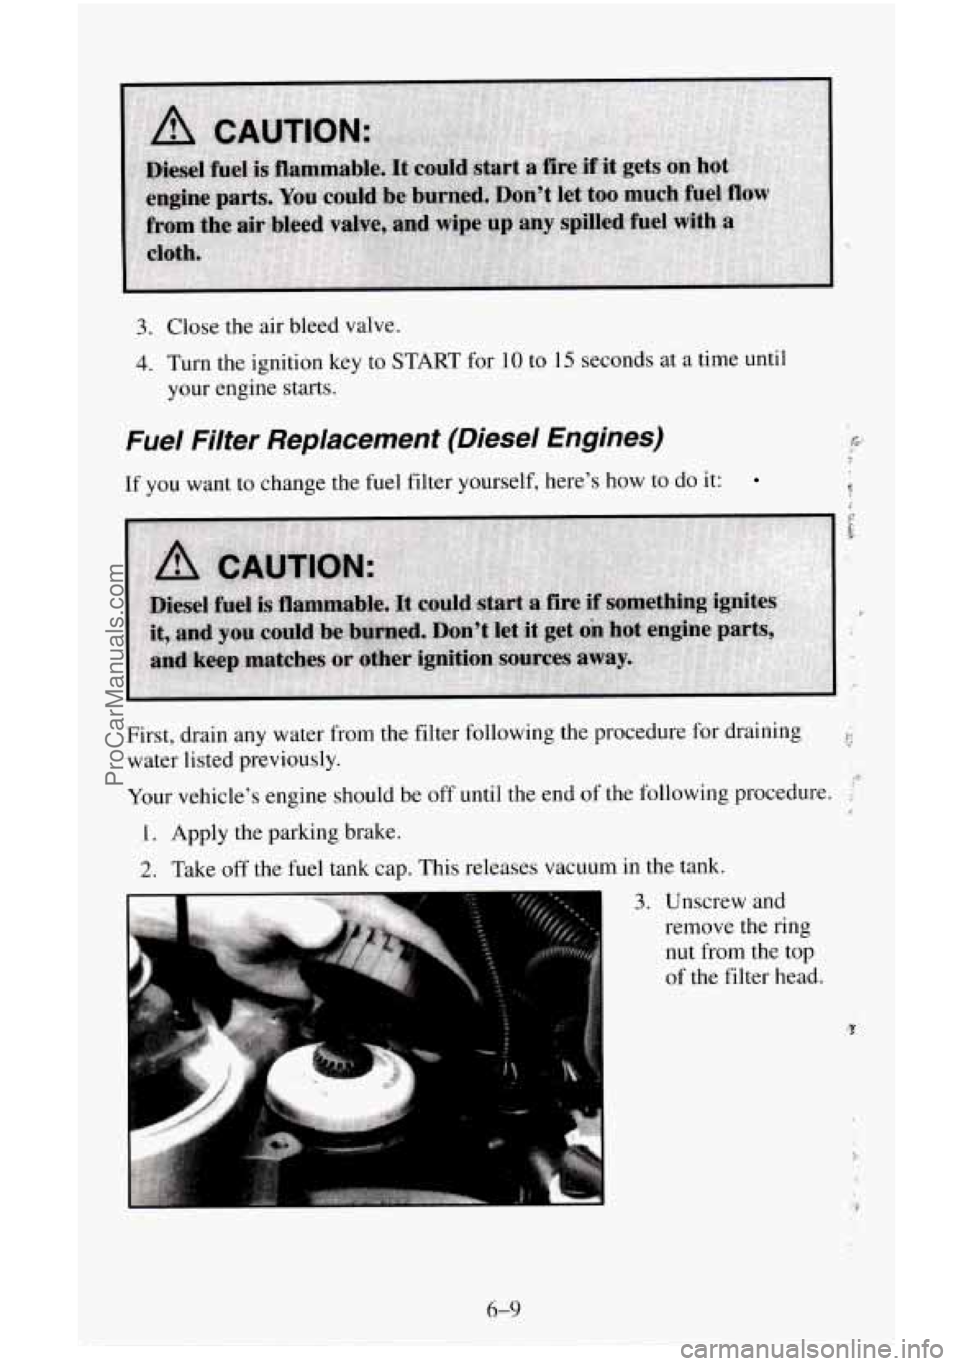 CHEVROLET SUBURBAN 1995  Owners Manual 3. Close the  air  bleed valve. 
4. Turn the  ignition key to START  for 10 to 15 seconds  at a time until 
your  engine  starts. 
Fuel  Filter  Replacement  (Diesel  Engines) 
If  you  want to change